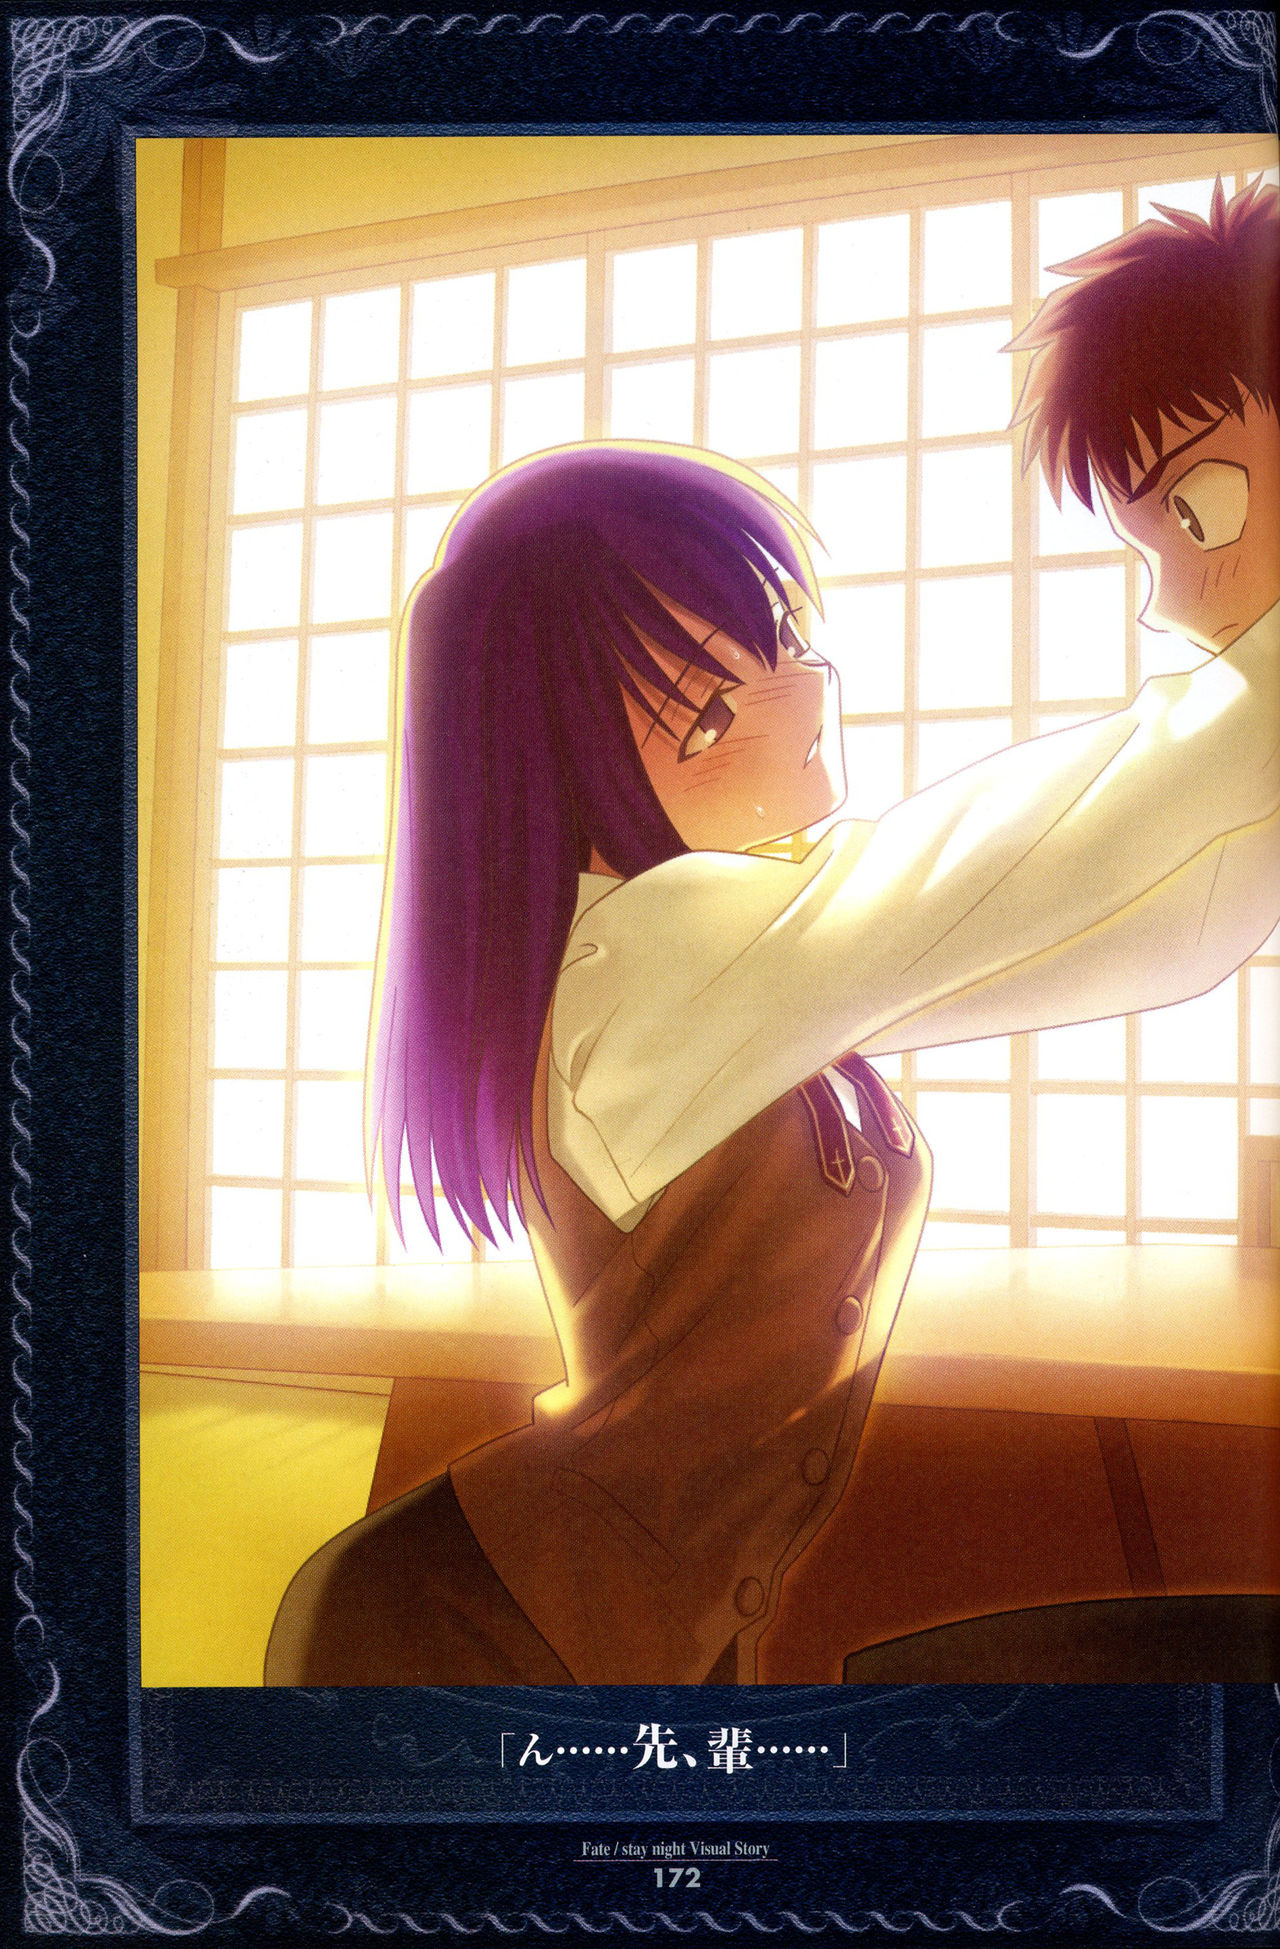 Fate/stay night Visual Story 